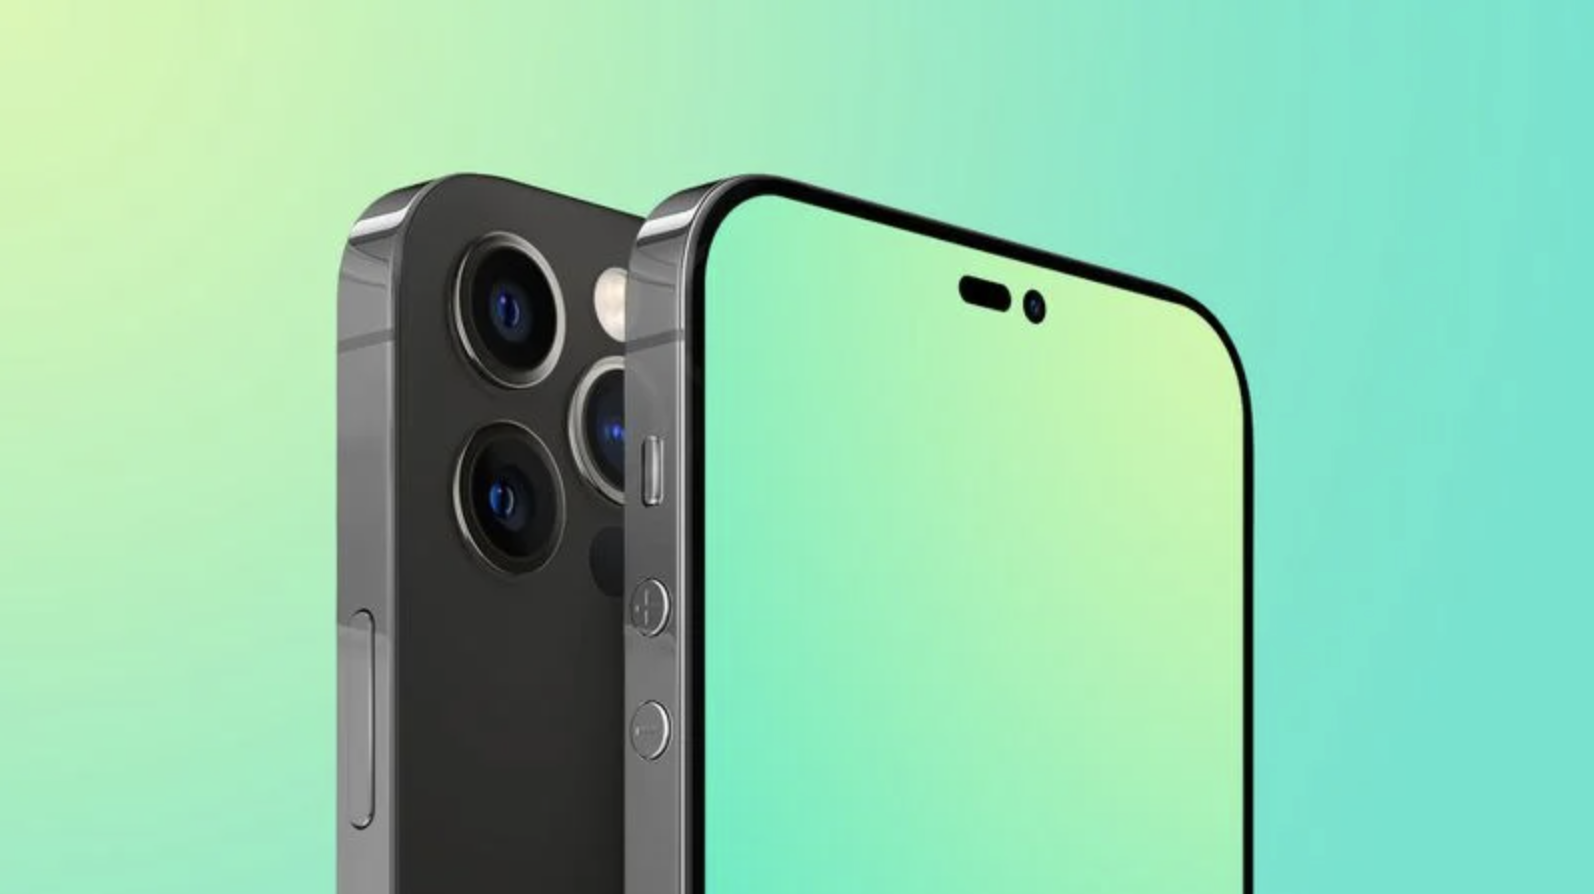 iPhone 14 Pro models front design featuring the new camera cutouts